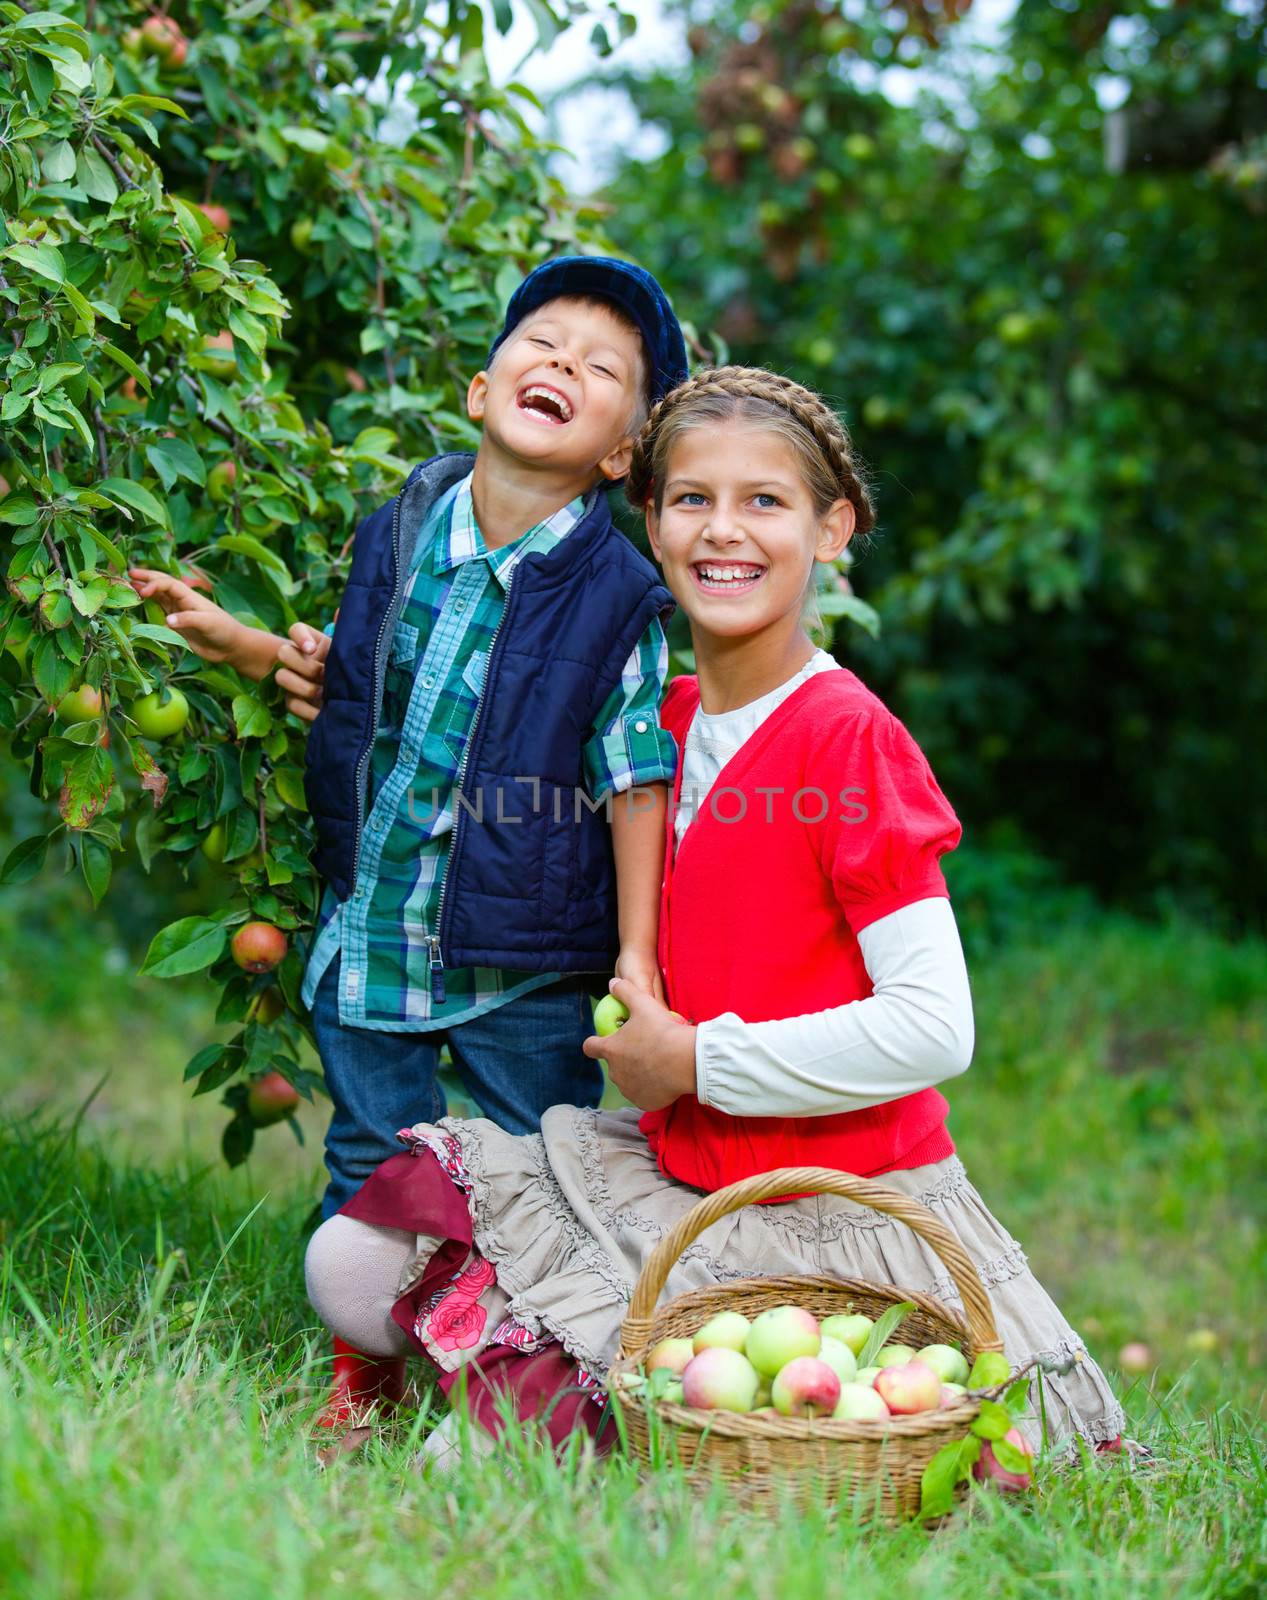 Harvesting apples. Cute little boy with sister helping in the garden and picking apples in the basket.